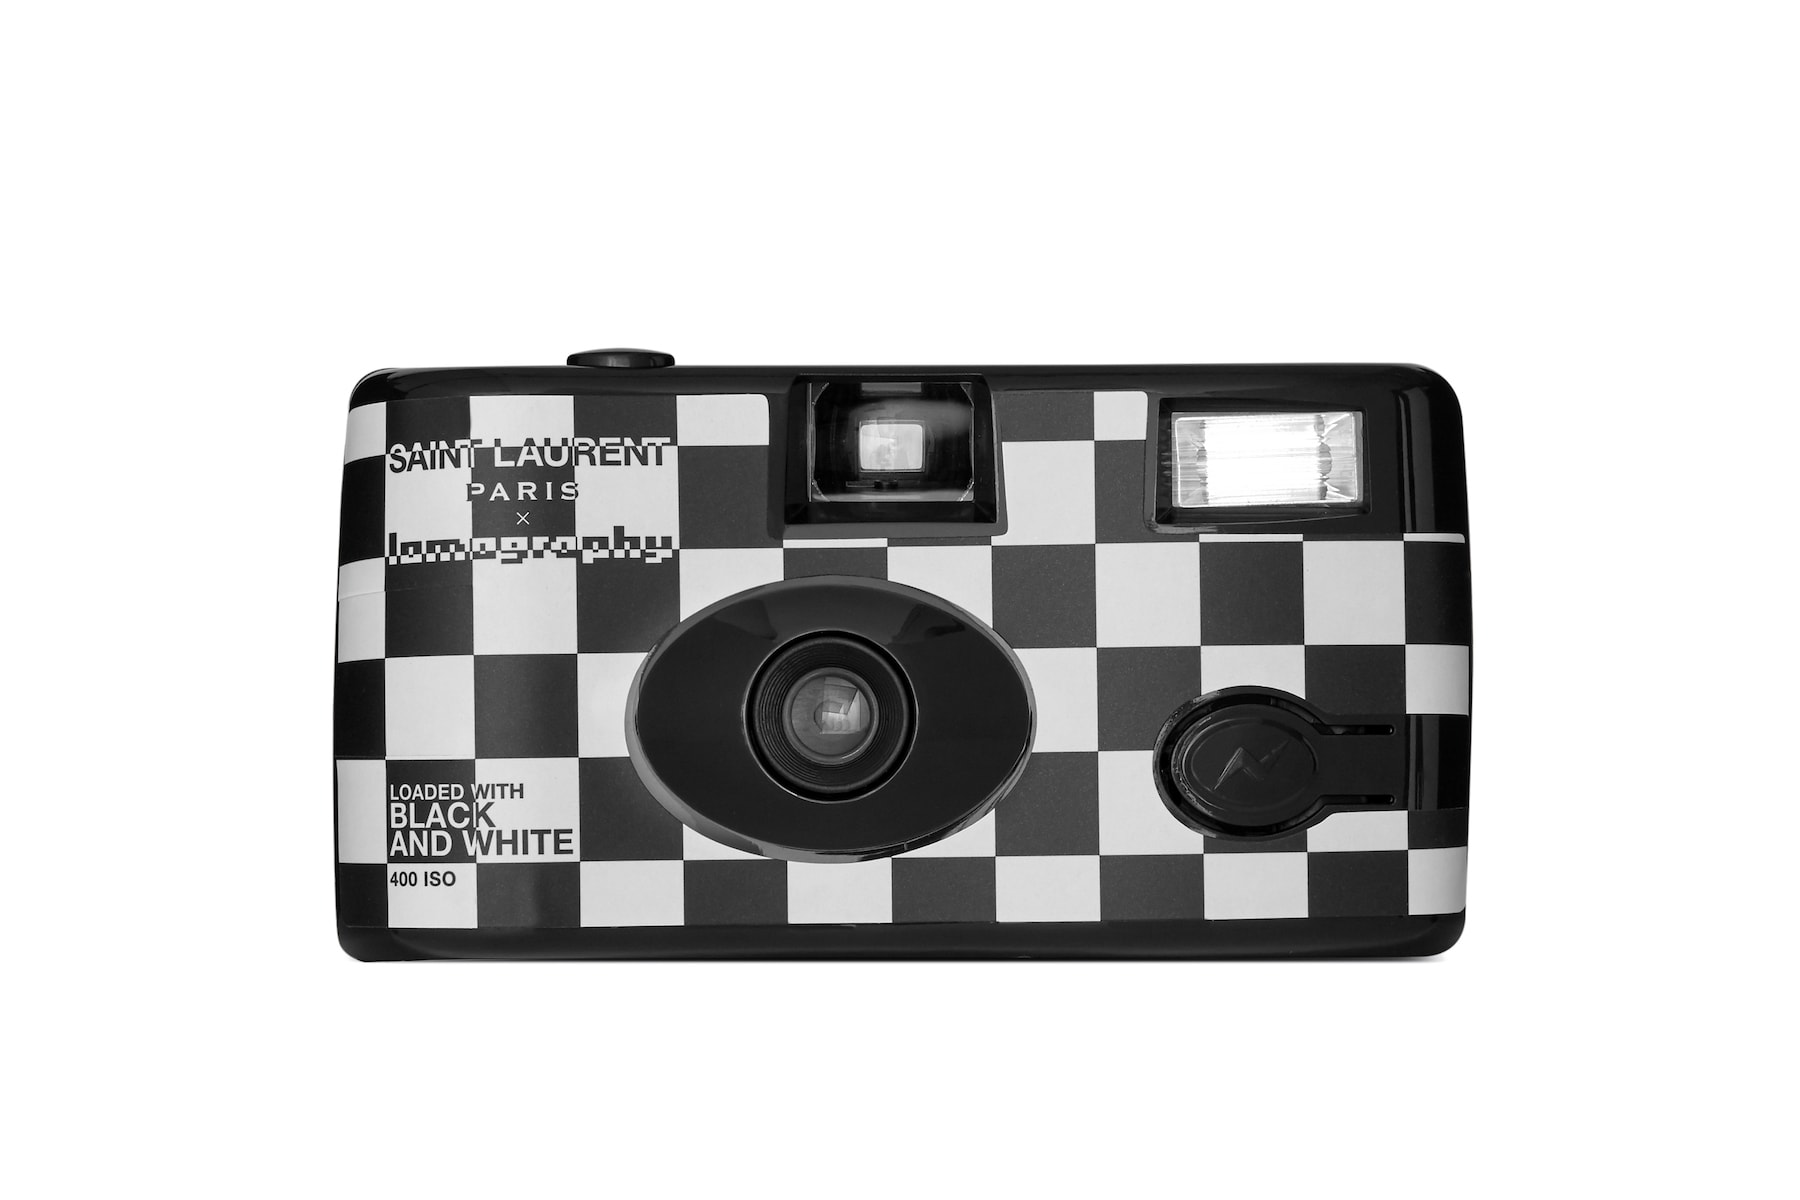 Saint Laurent x Lomography Film Camera Where to Buy Rive Droite Limited Edition Collaboration